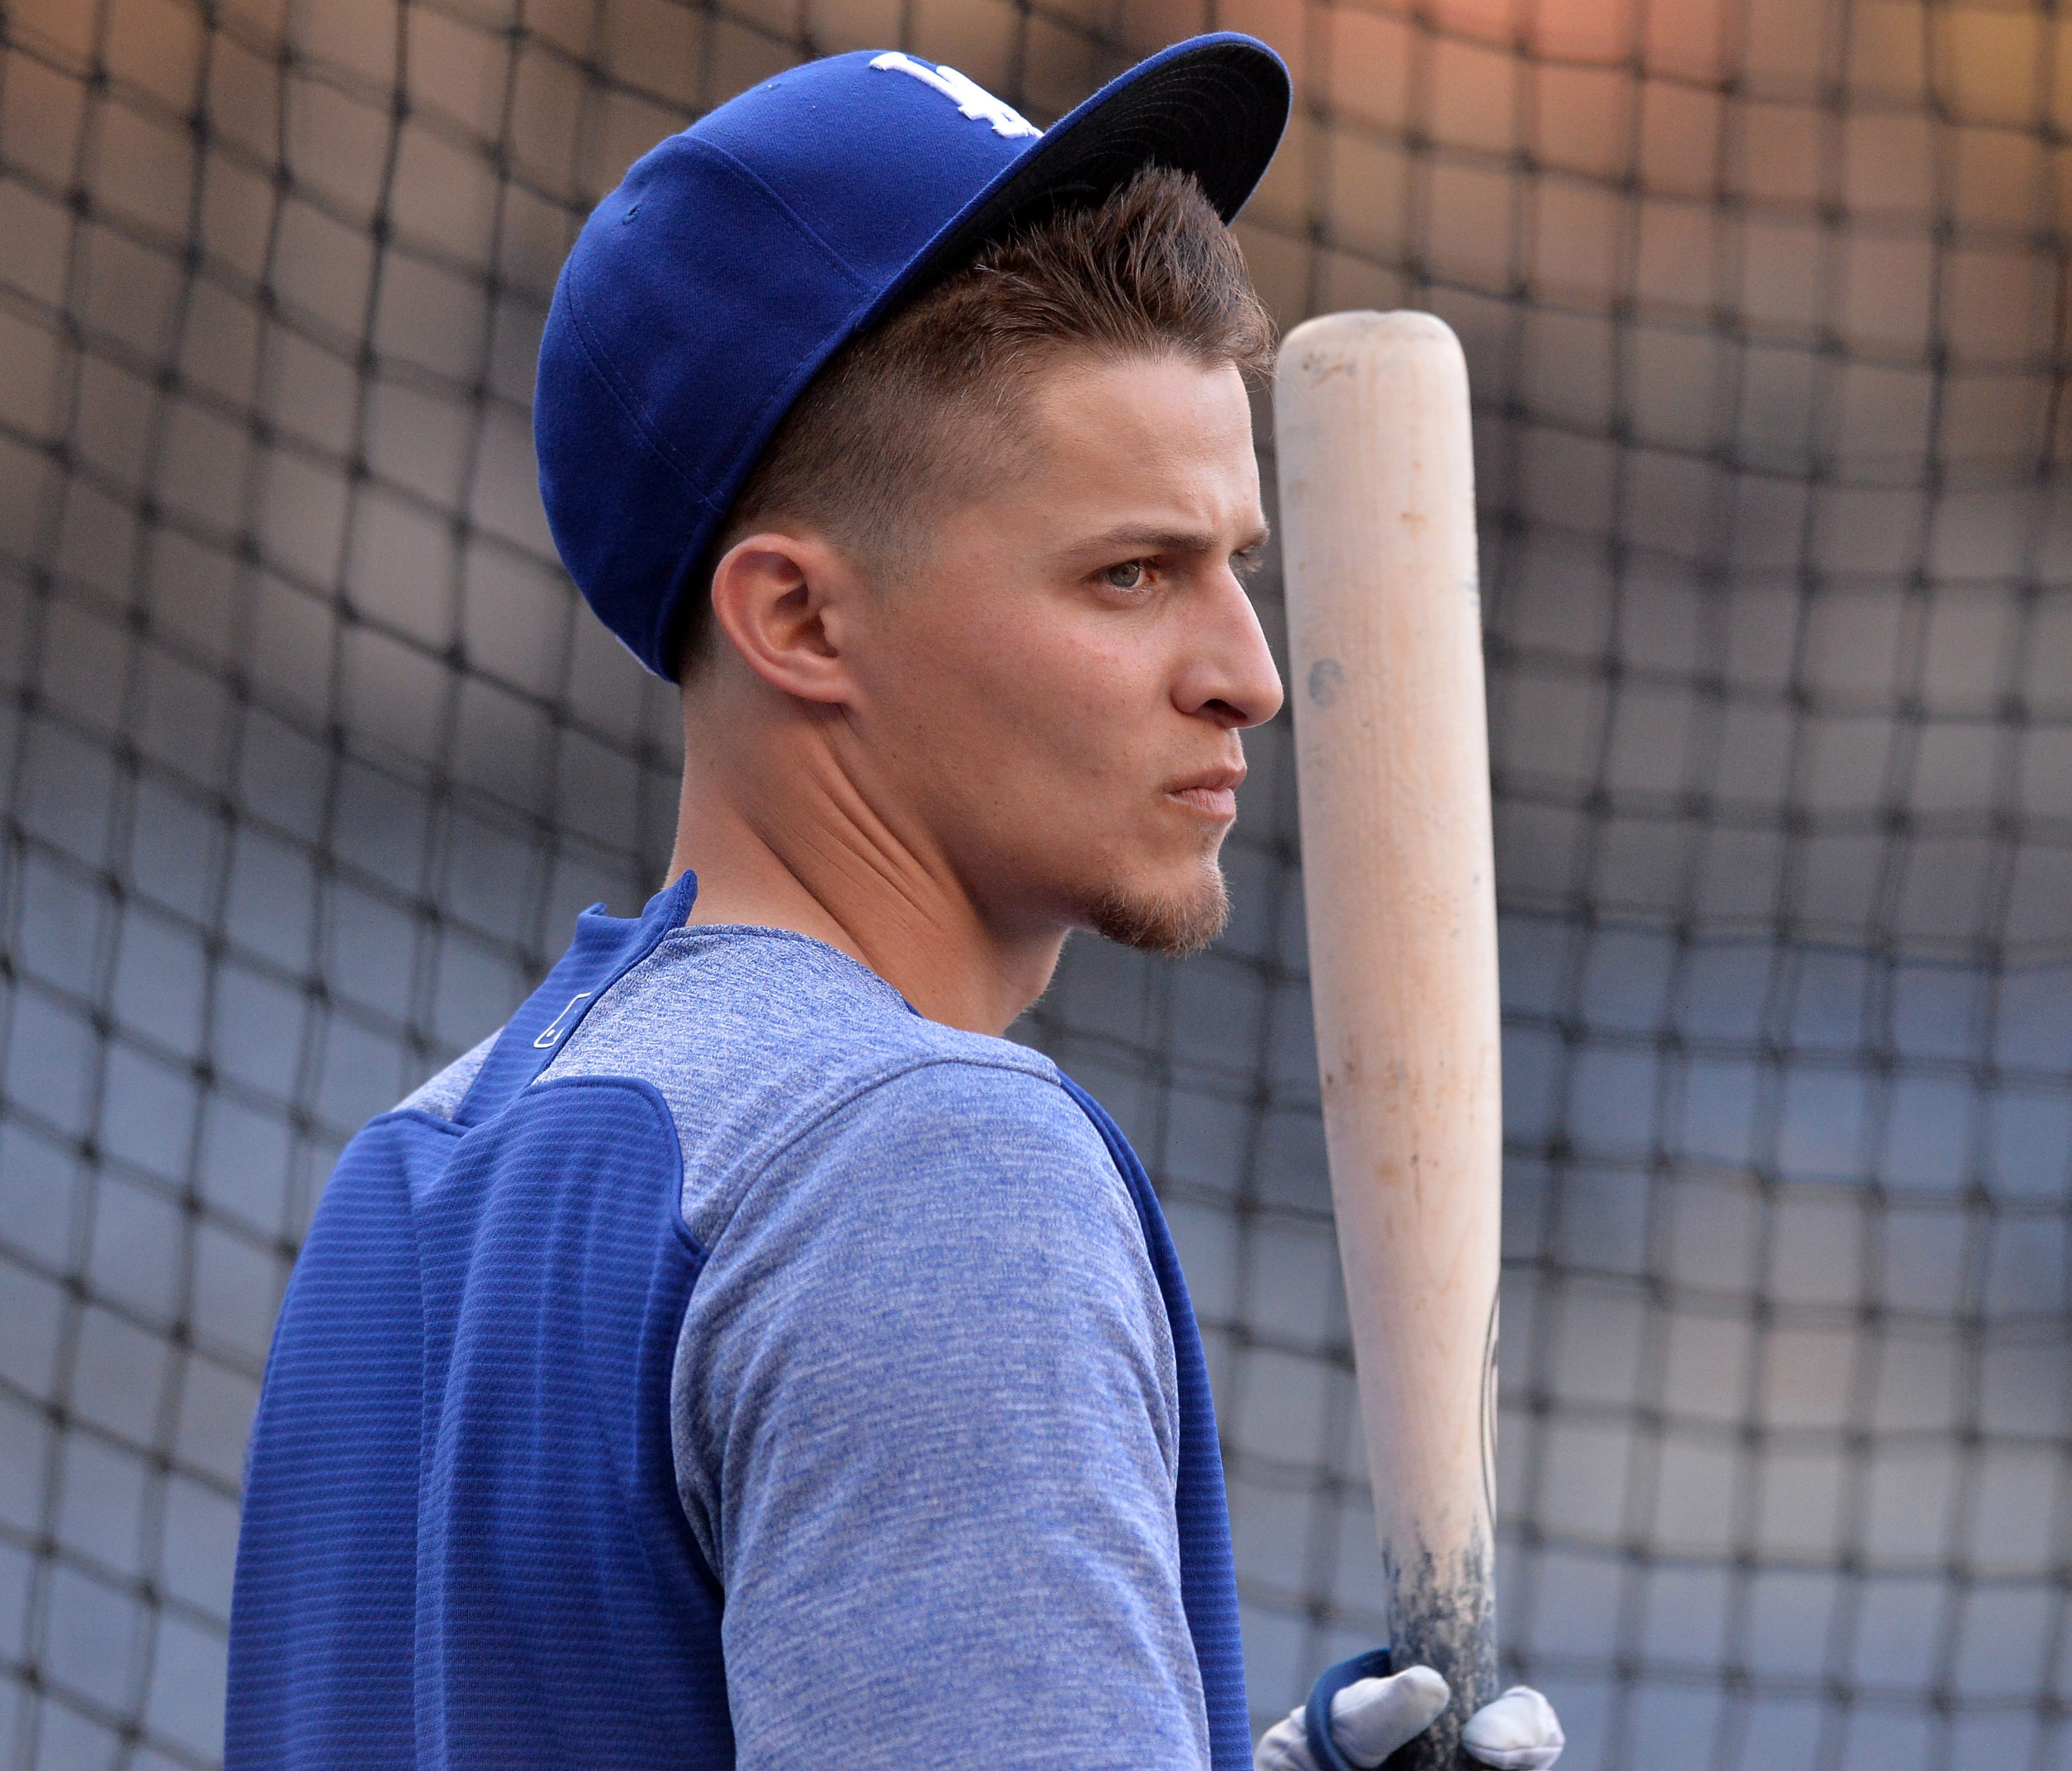 Corey Seager was hitting .267 with two homers and 13 RBI in his first 26 games.